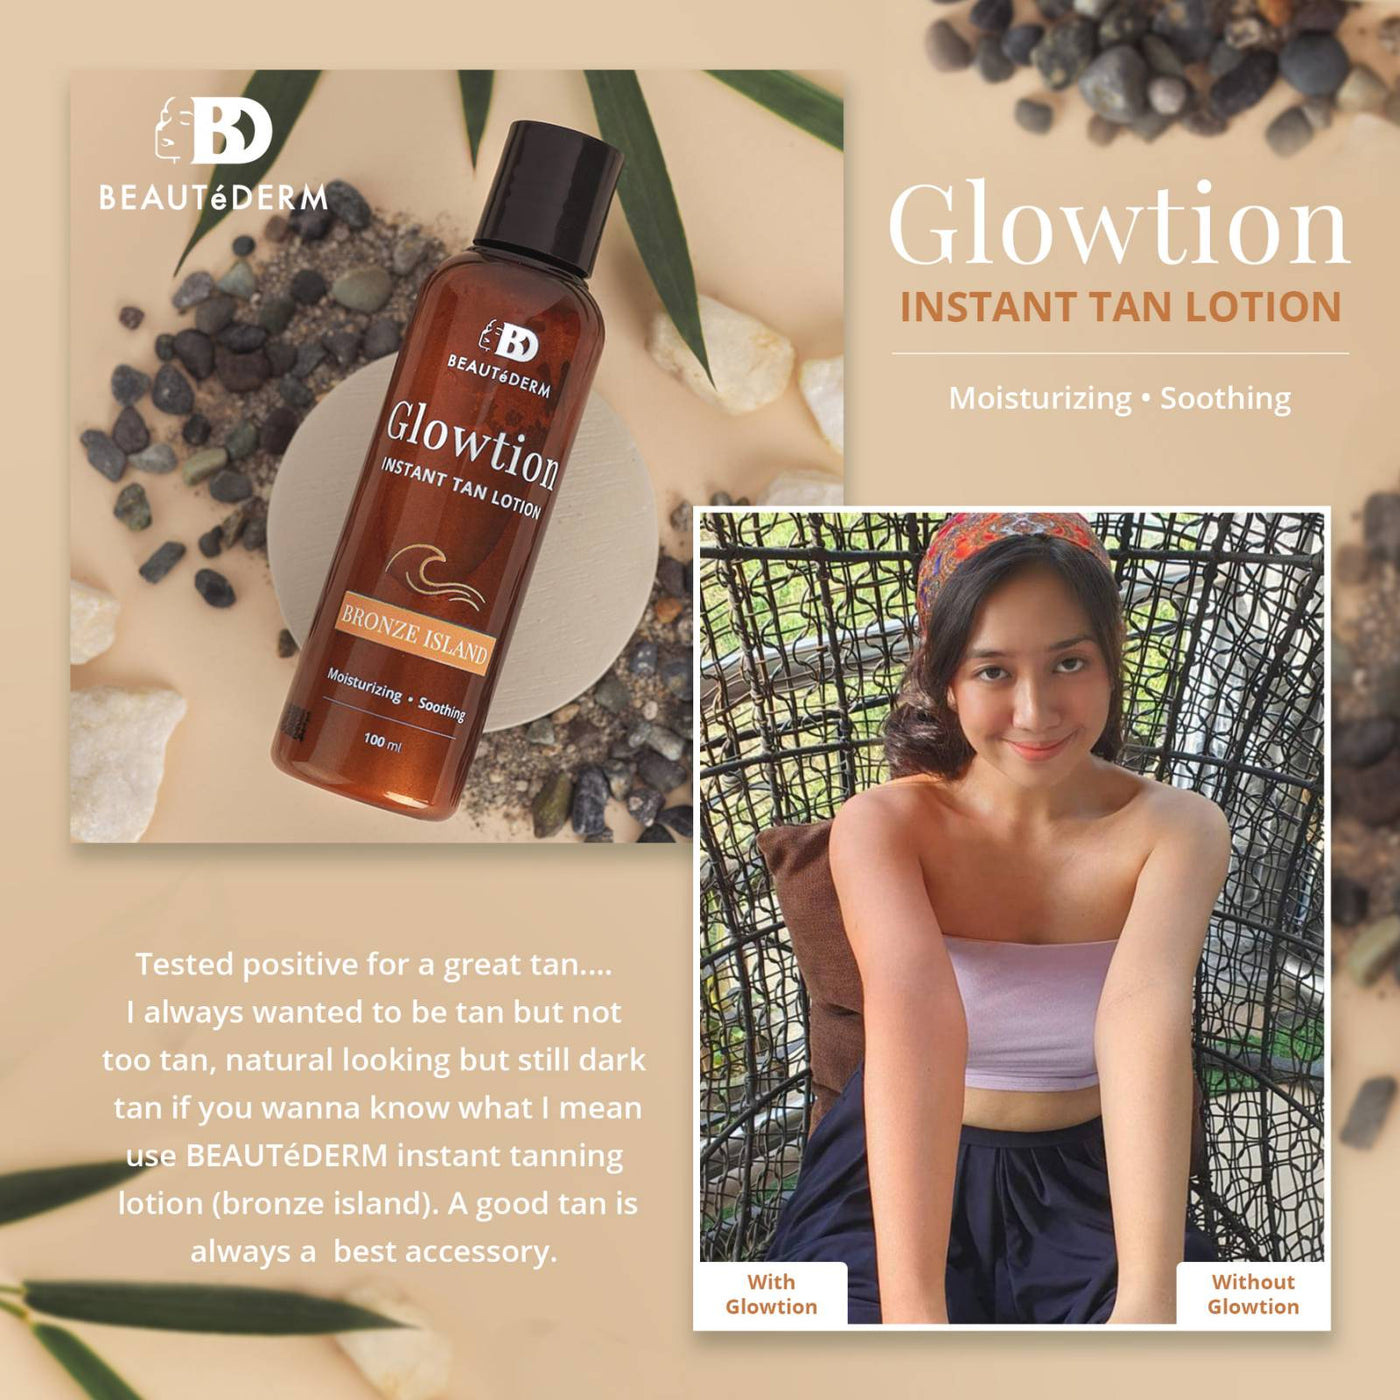 Glowtion Instant Tan Lotion